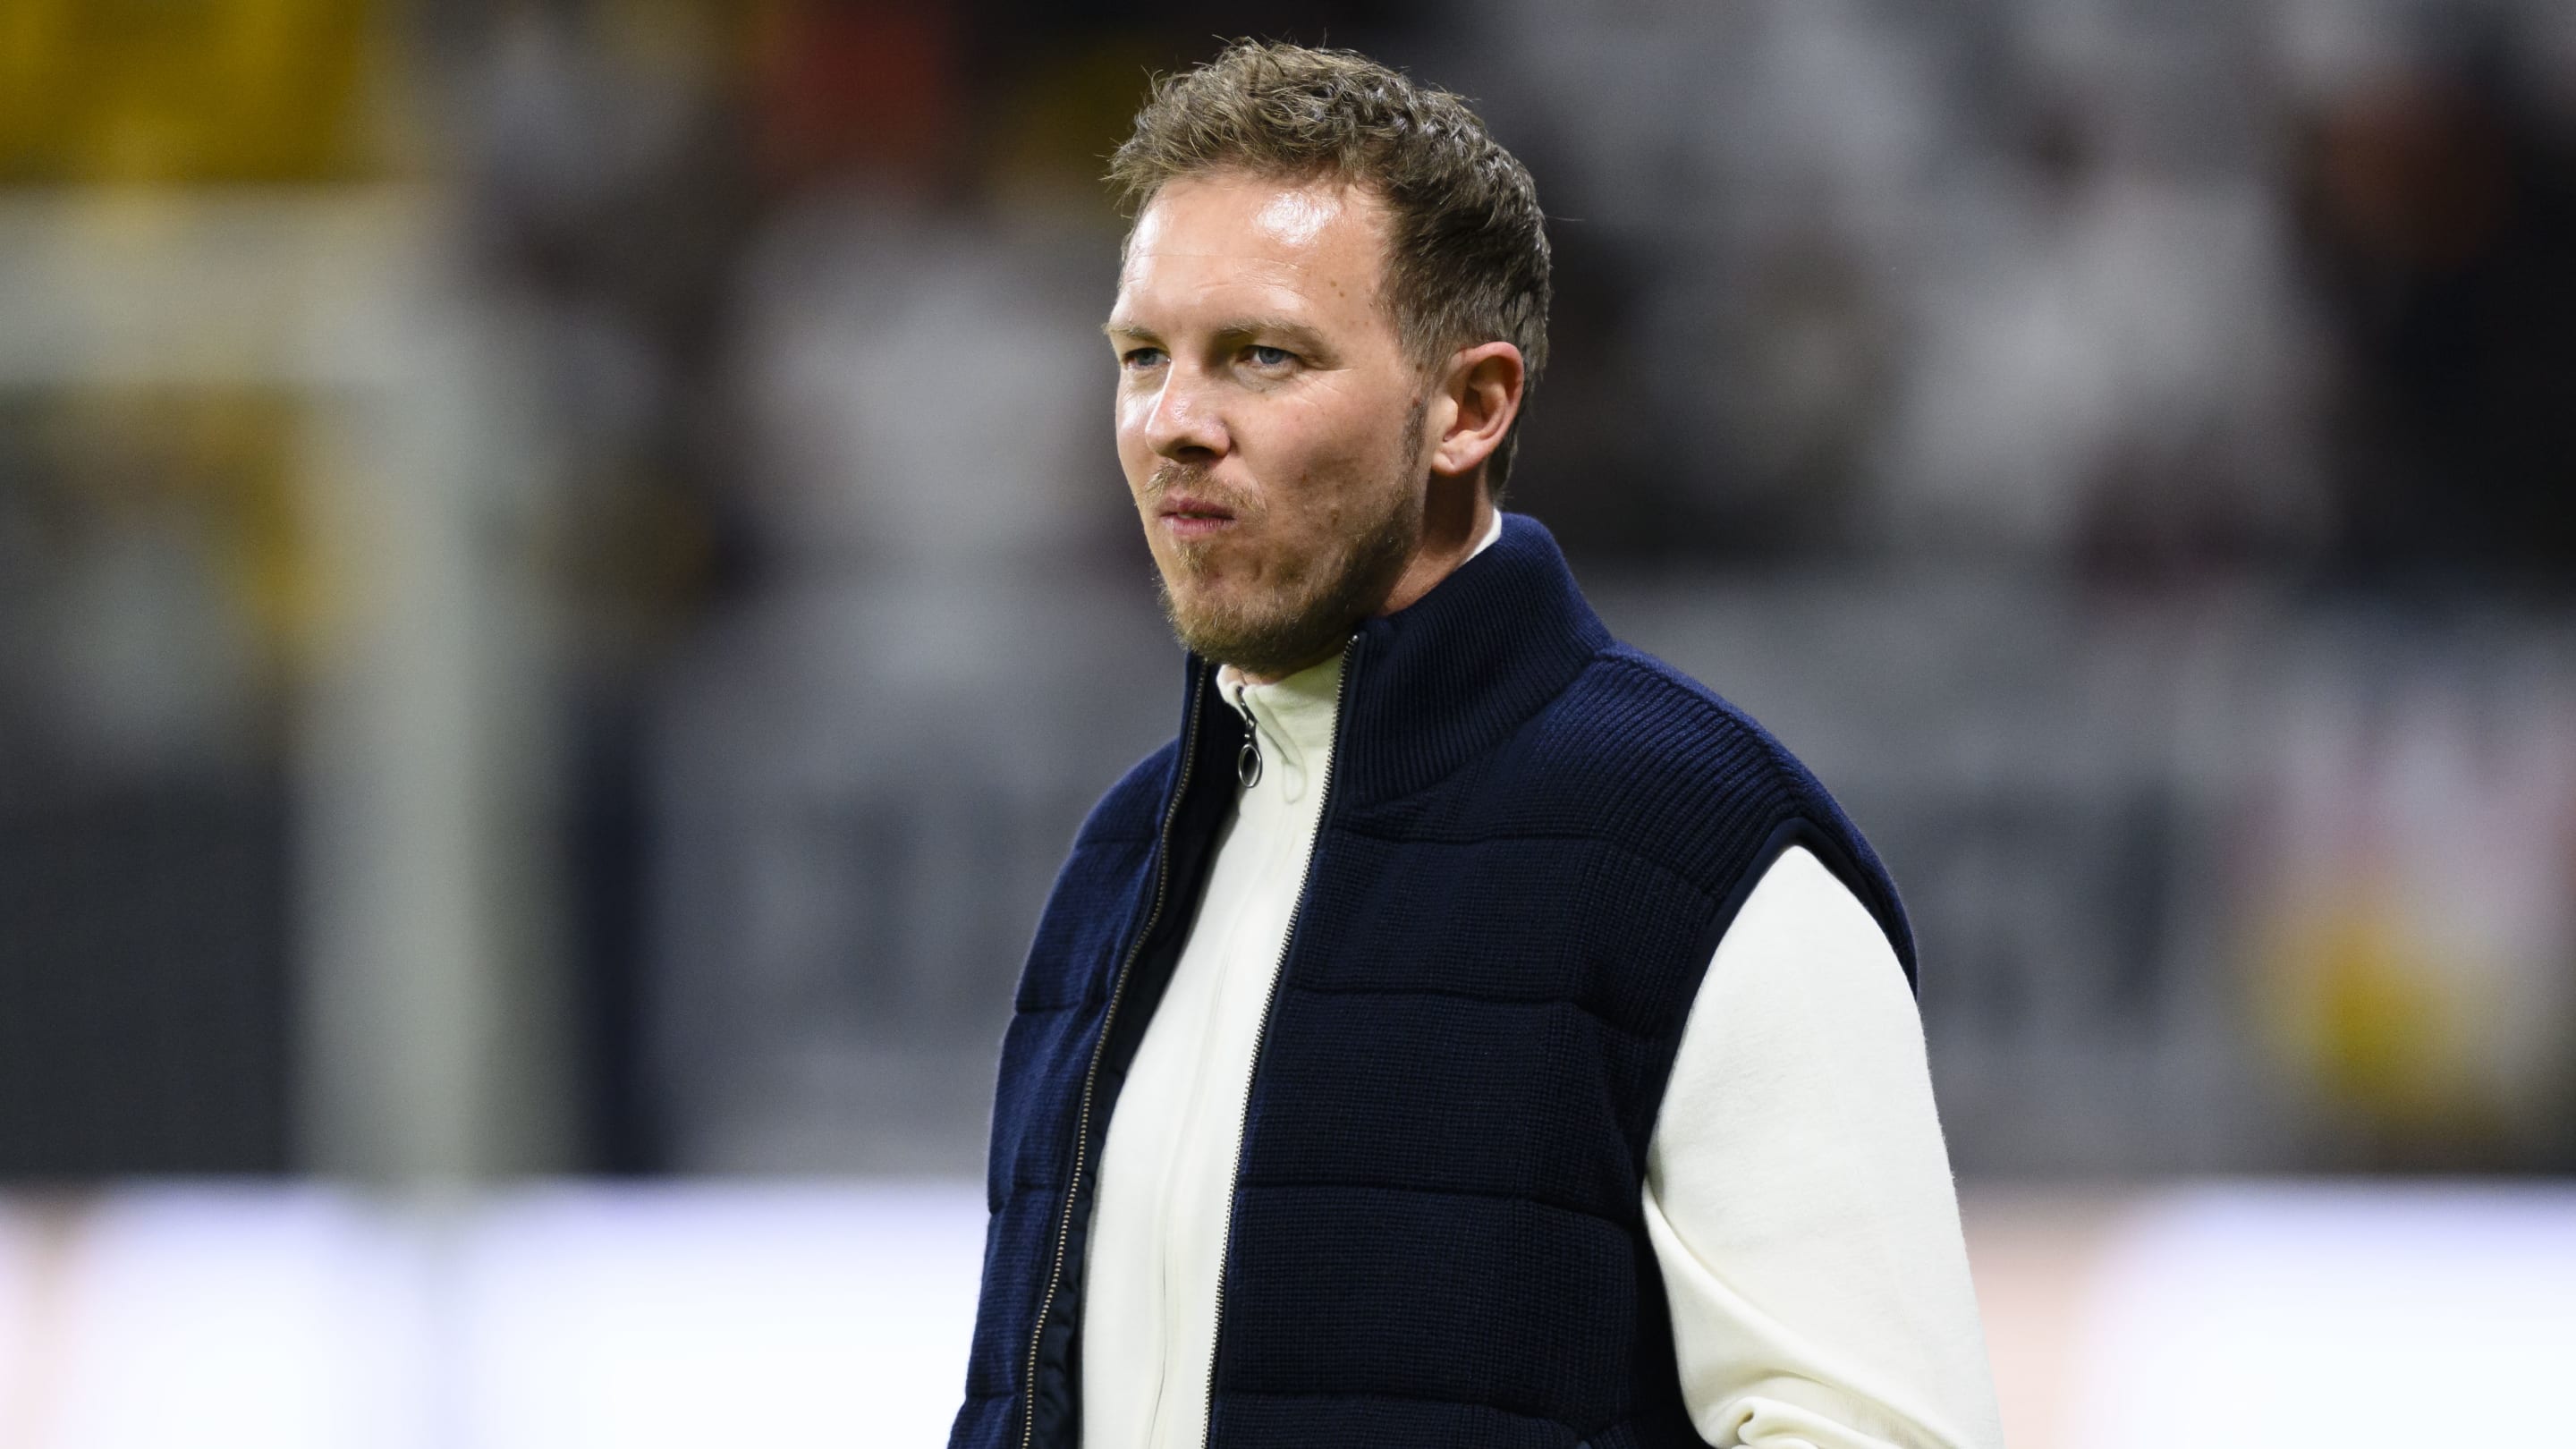 Julian Nagelsmann in talks with 'not just Bayern' amid Liverpool interest